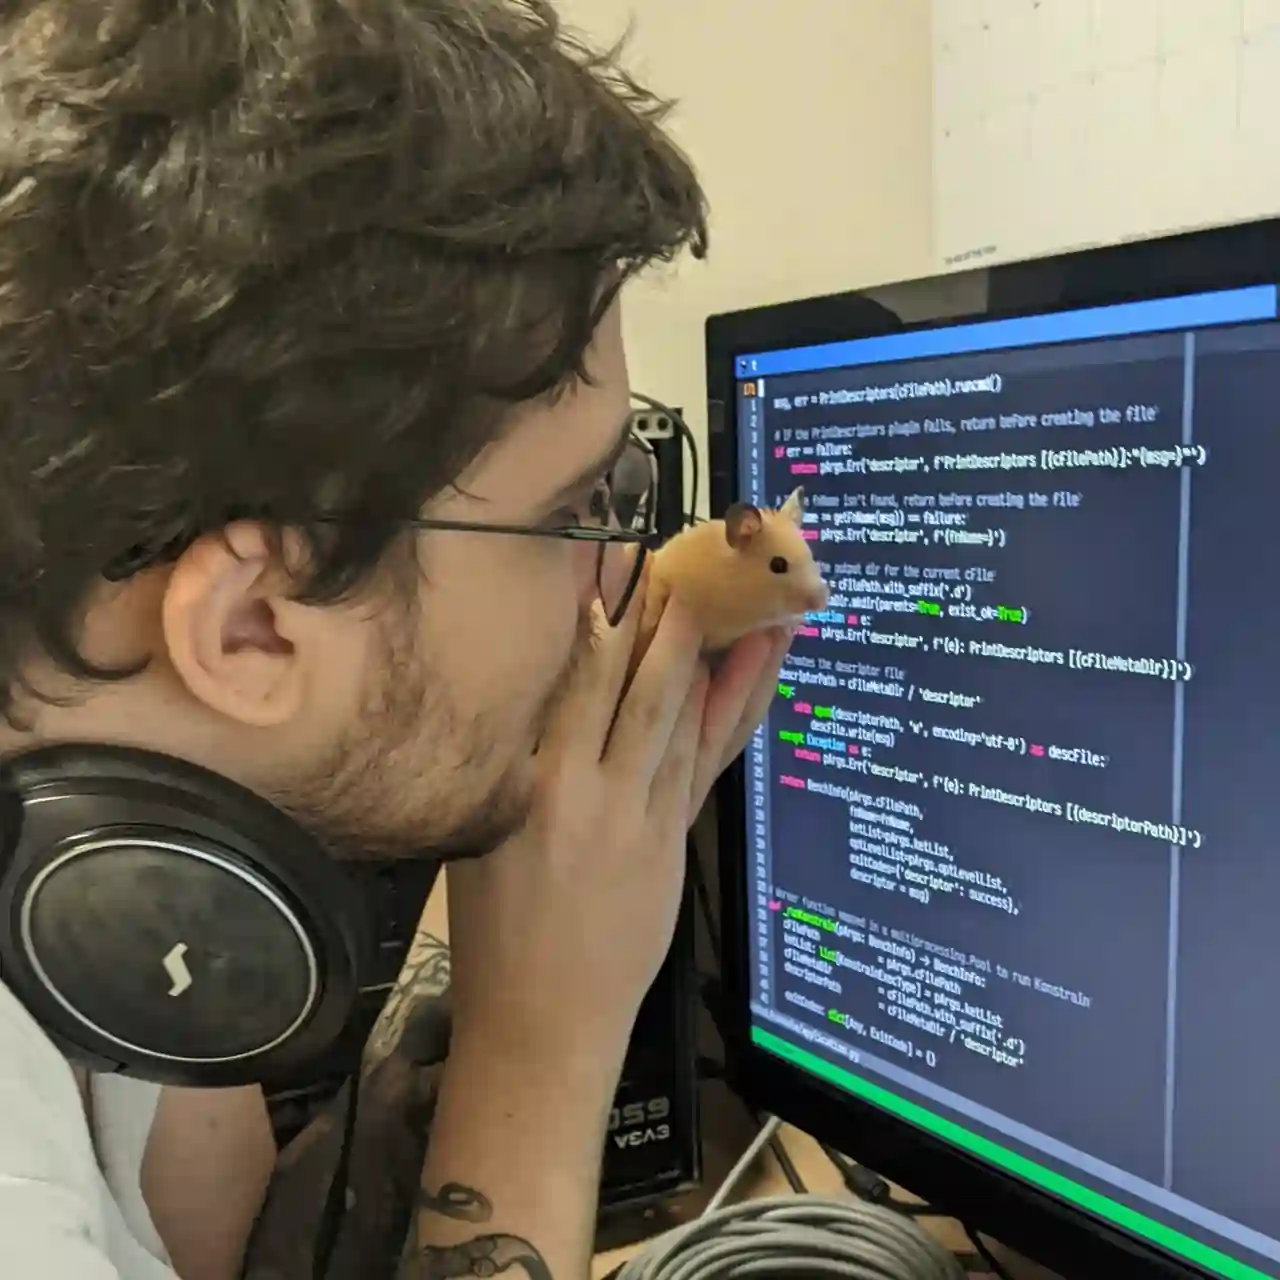 profile pic: hamster looking at vim in a screen, showing a noob (author) how the pros do it